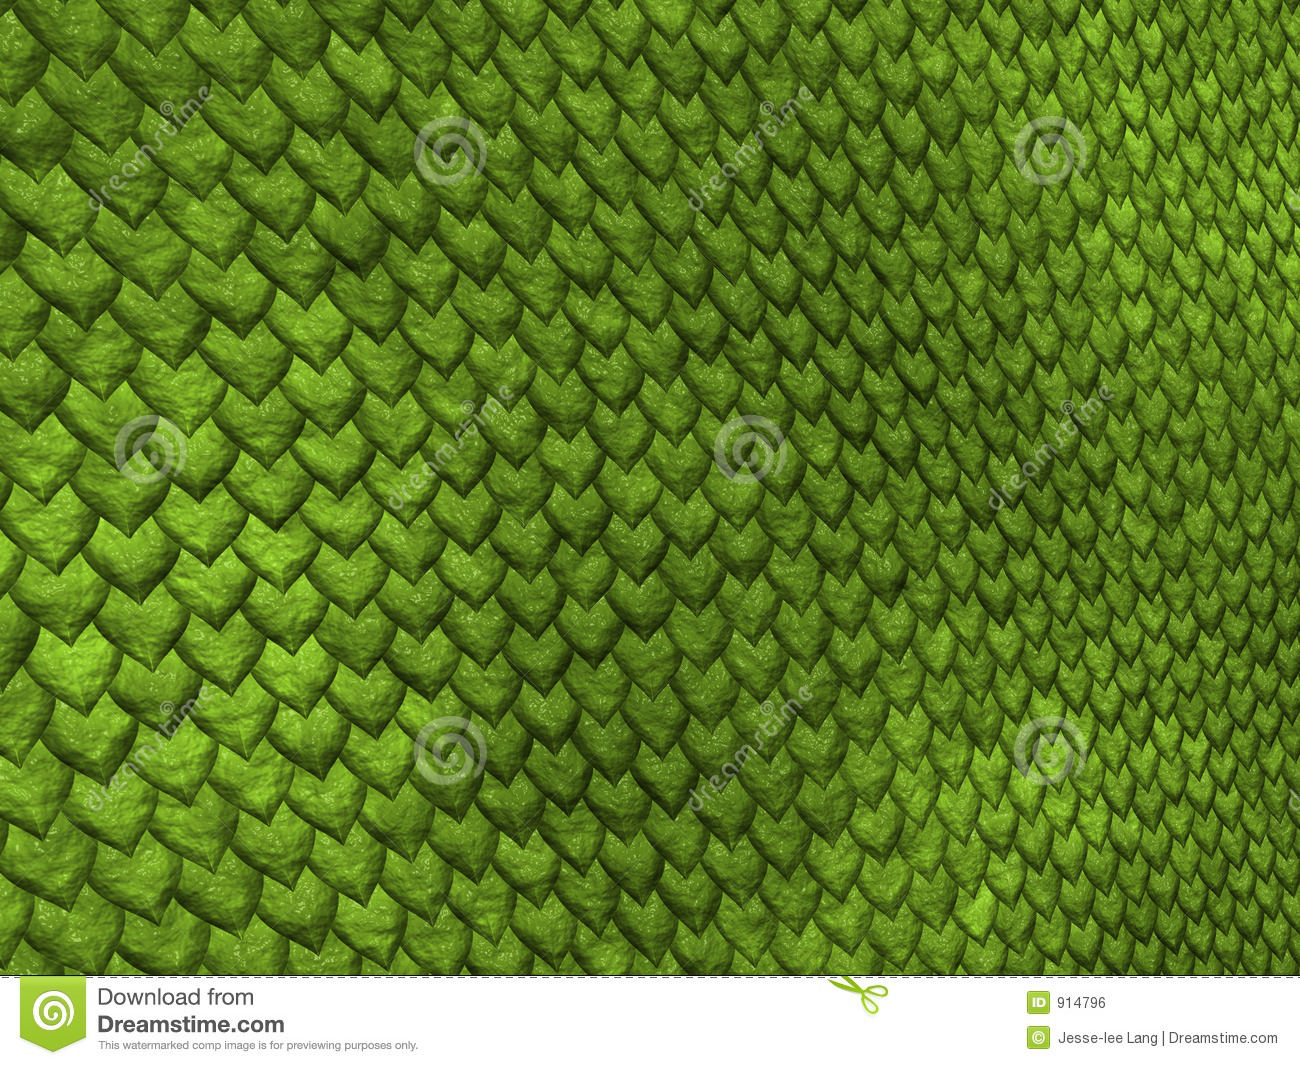 Lizard Scales Royalty Free Stock Image   Image  914796